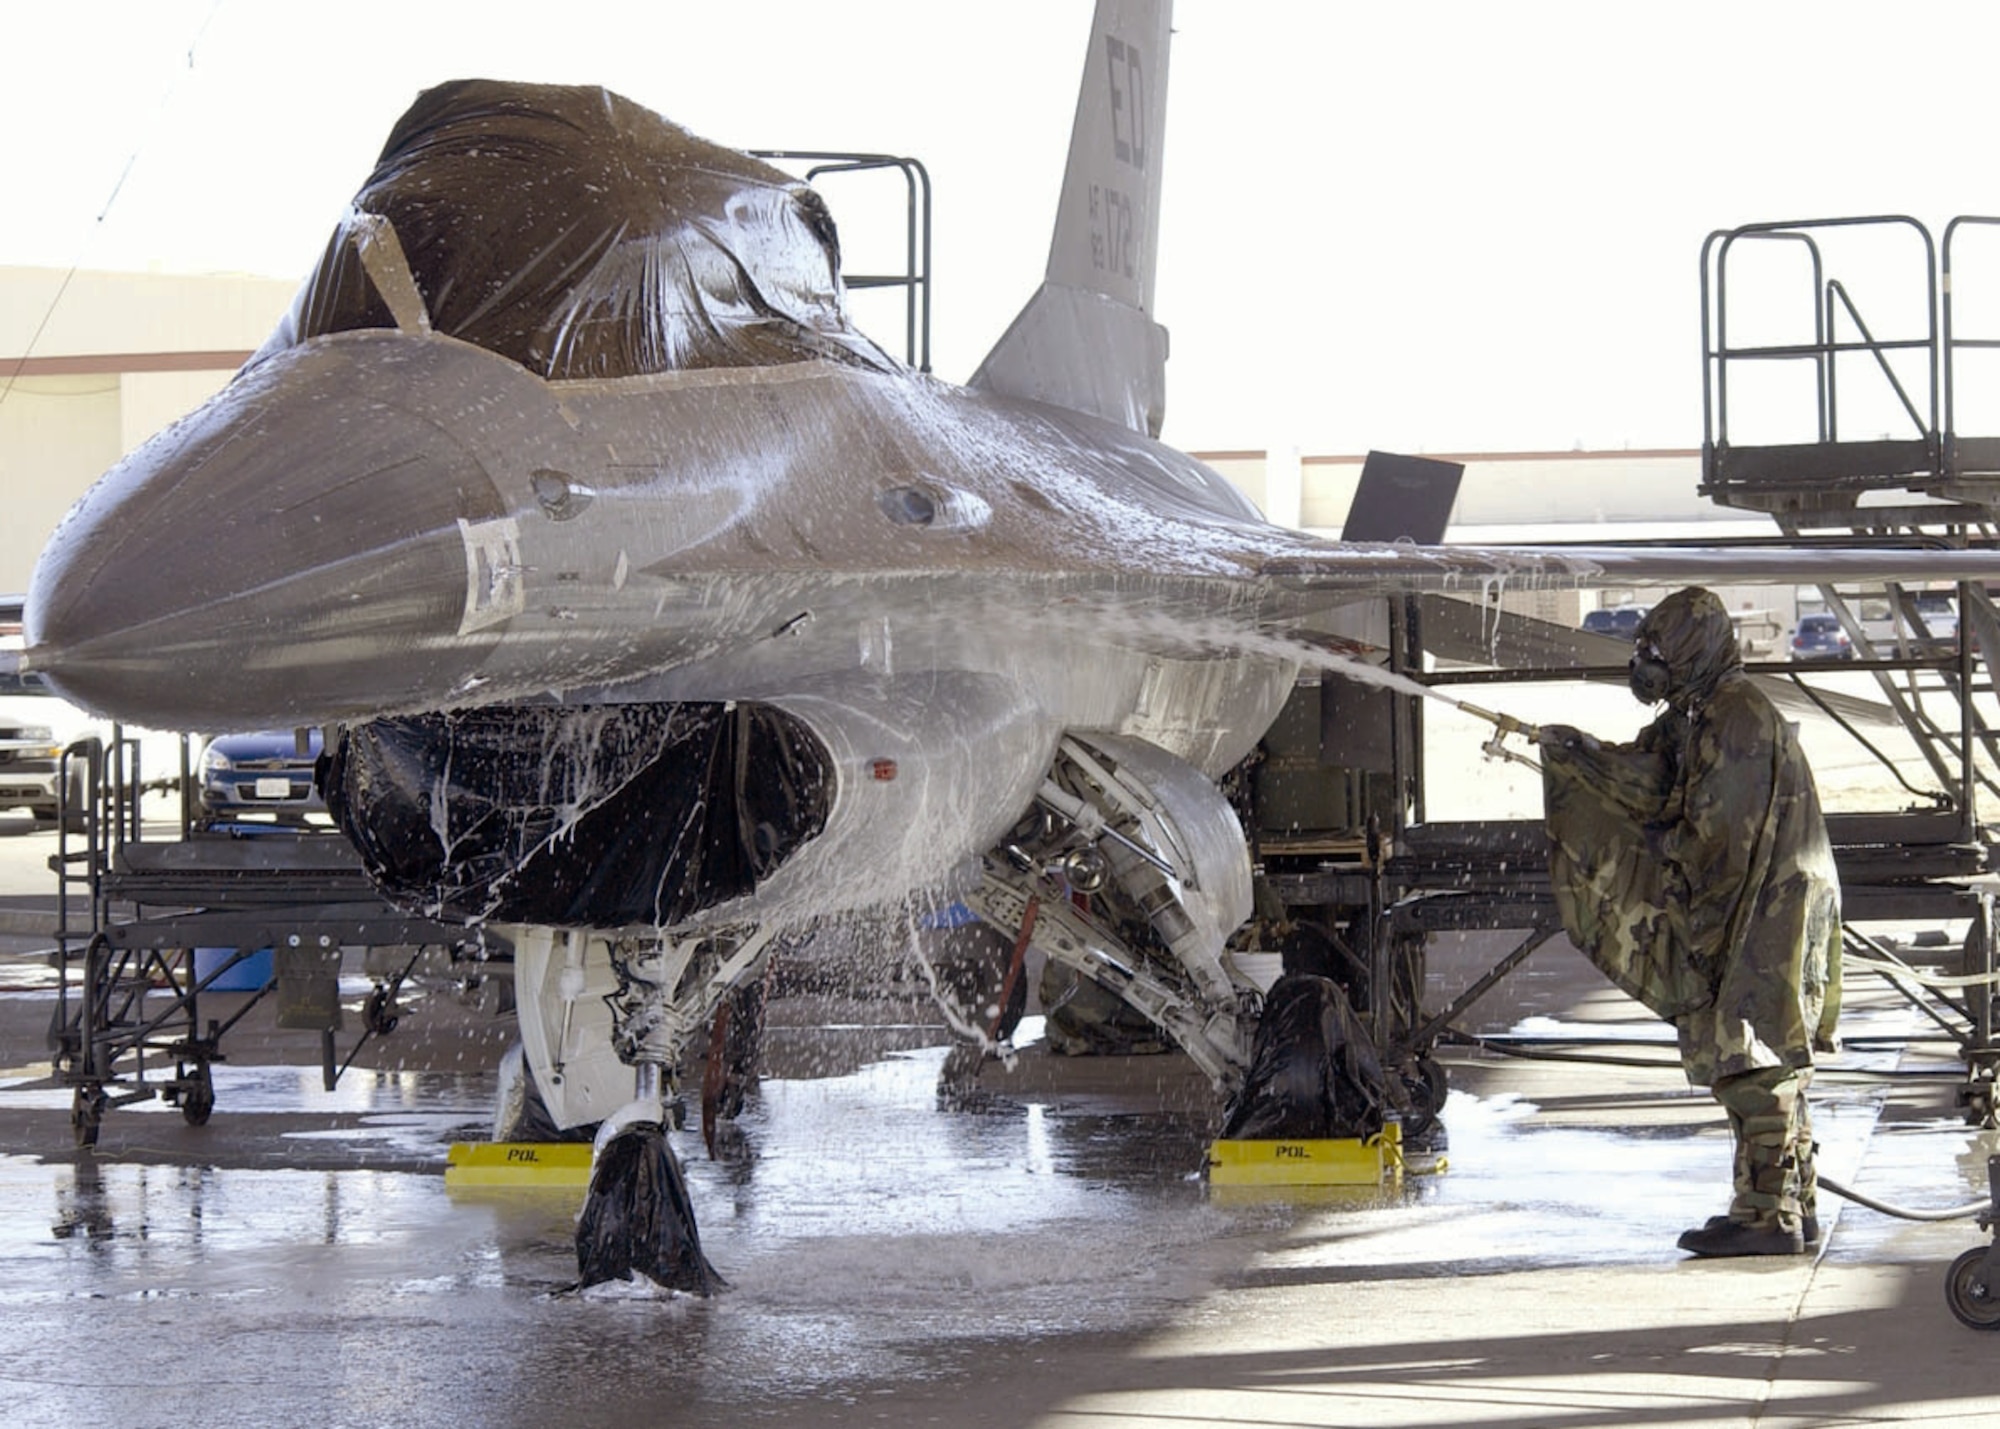 EDWARDS AIR FORCE BASE, Calif. (AFPN) -- An Airman with the Joint Strike Fighter Integrated Test Force sprays down an F-16 Fighting Falcon before its final chemical decontamination test Jan. 30. The goal of the testing is to decontaminate an entire aircraft quickly and return it to service. (U.S. Air Force photo by Mark McCoy)